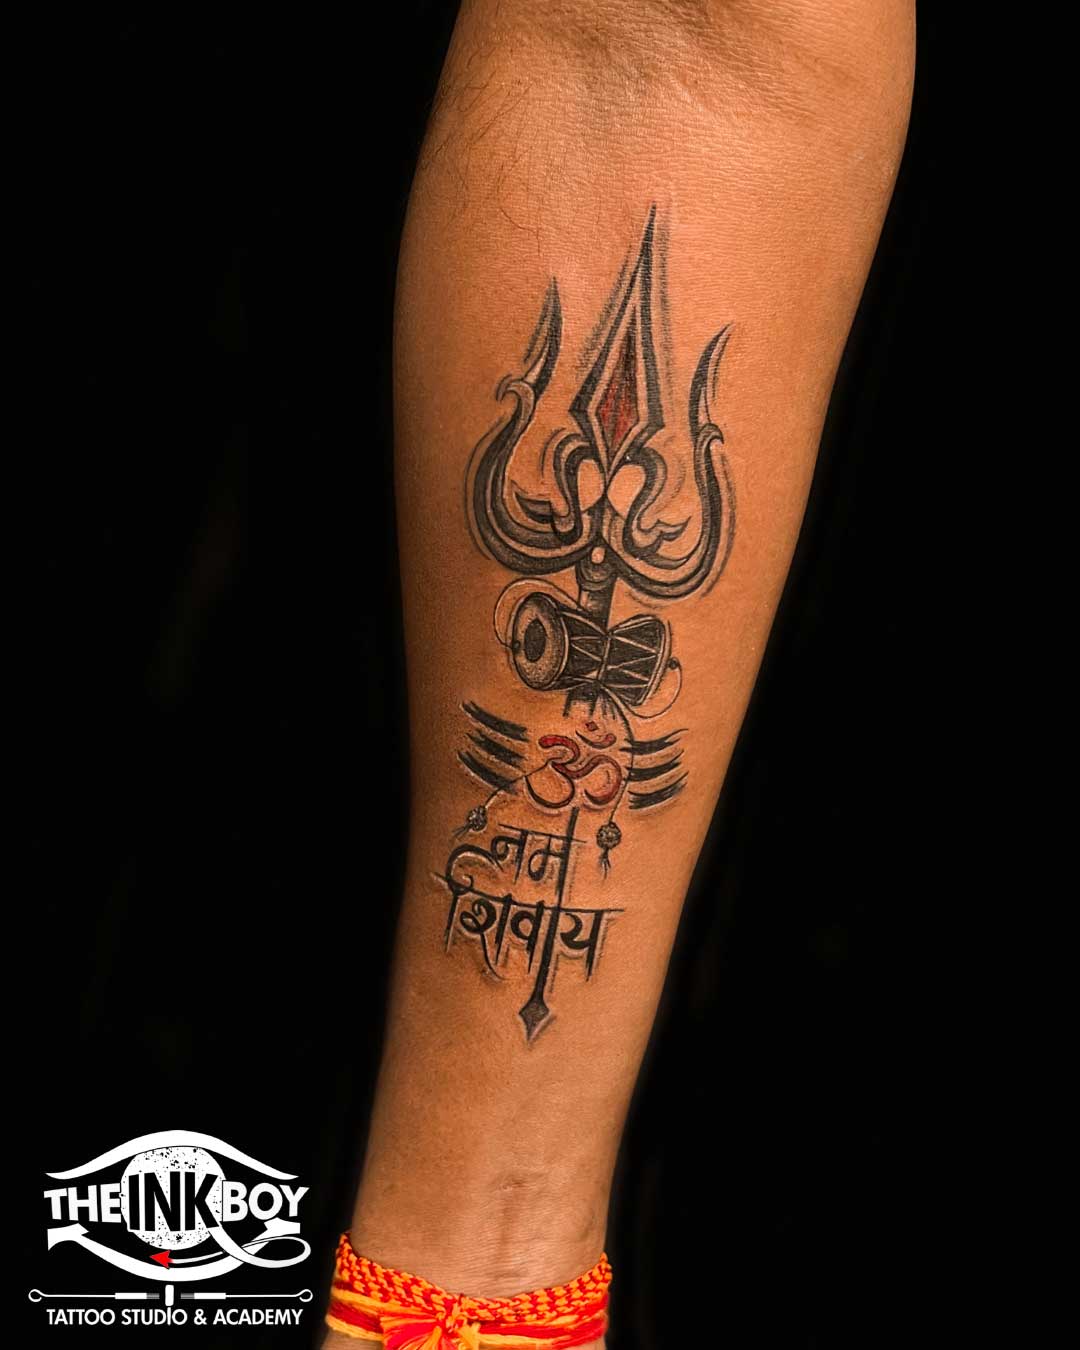 101 Amazing Hindu Tattoo Designs You Need To See! | Hindu tattoo, Tattoo  designs, Hindu tattoos